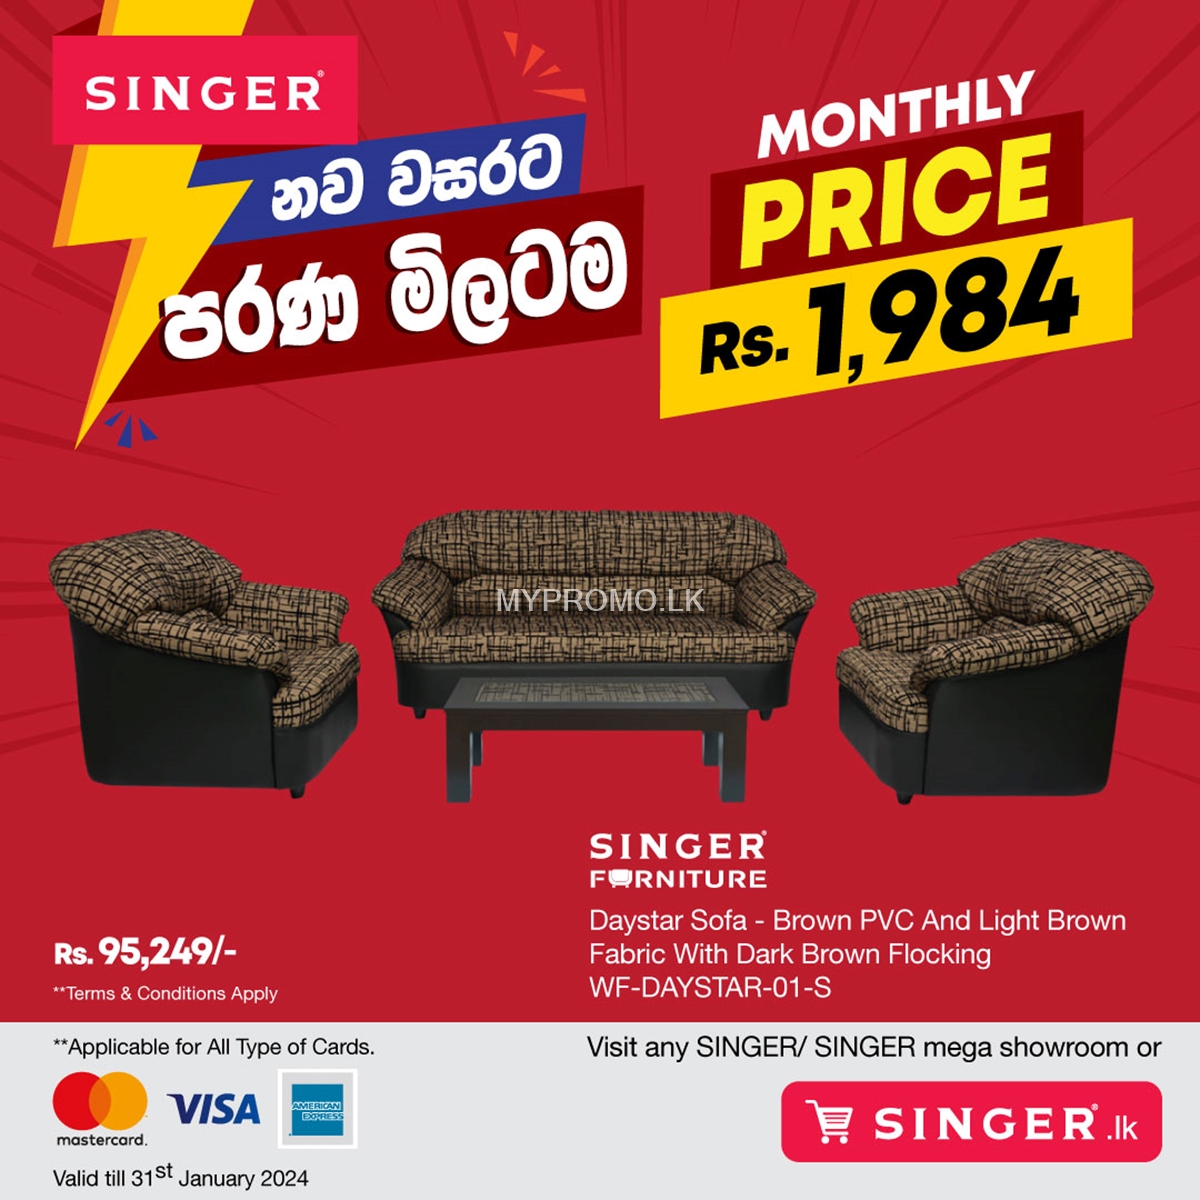 Lots of brand new furniture and household appliances from SINGER at the lowest prices